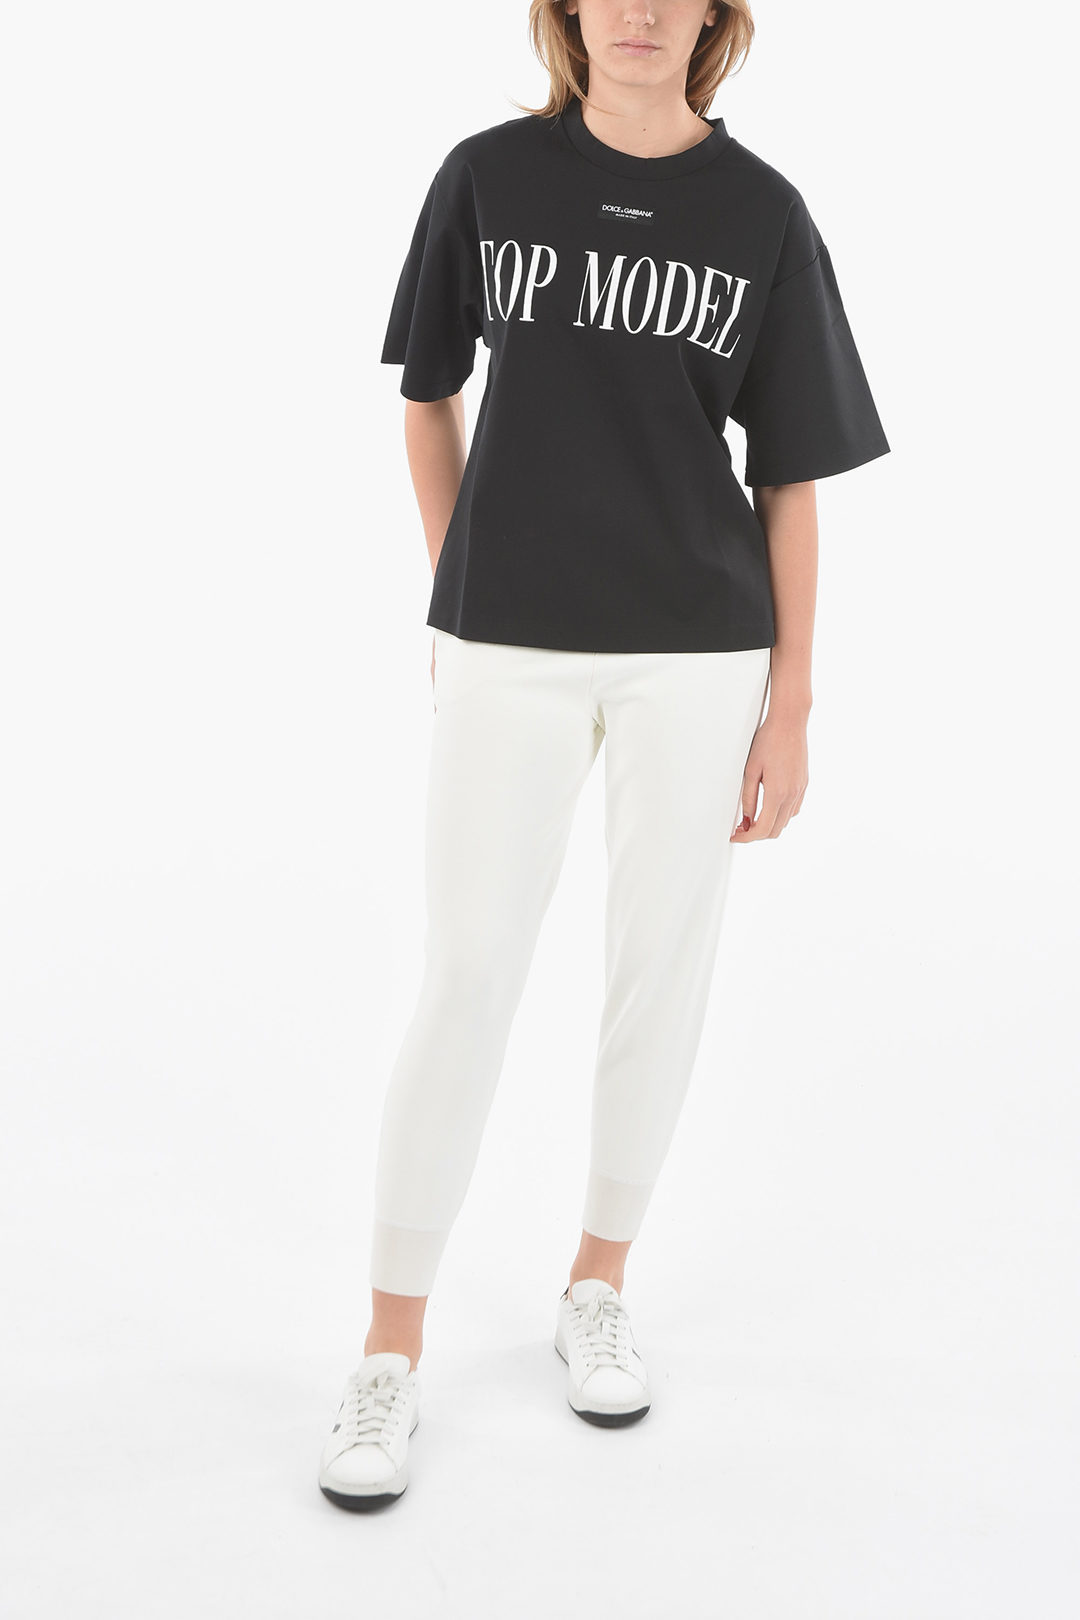 Outlet & Crewneck MODEL with TOP Lettering Gabbana - Glamood women Print Dolce T-shirt